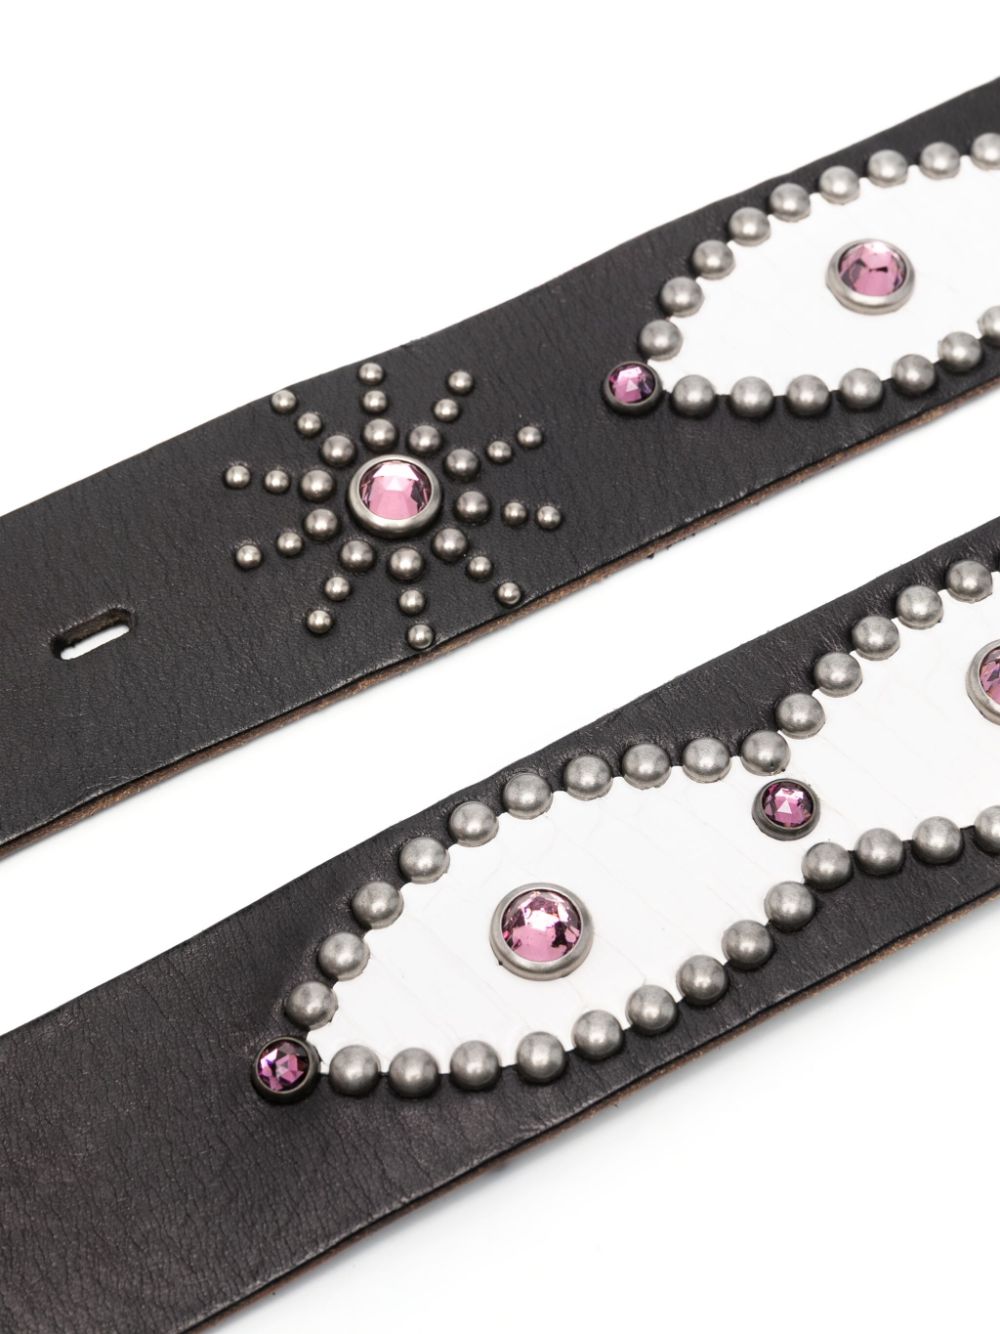 Htc HTC- Embroidered Leather Belt